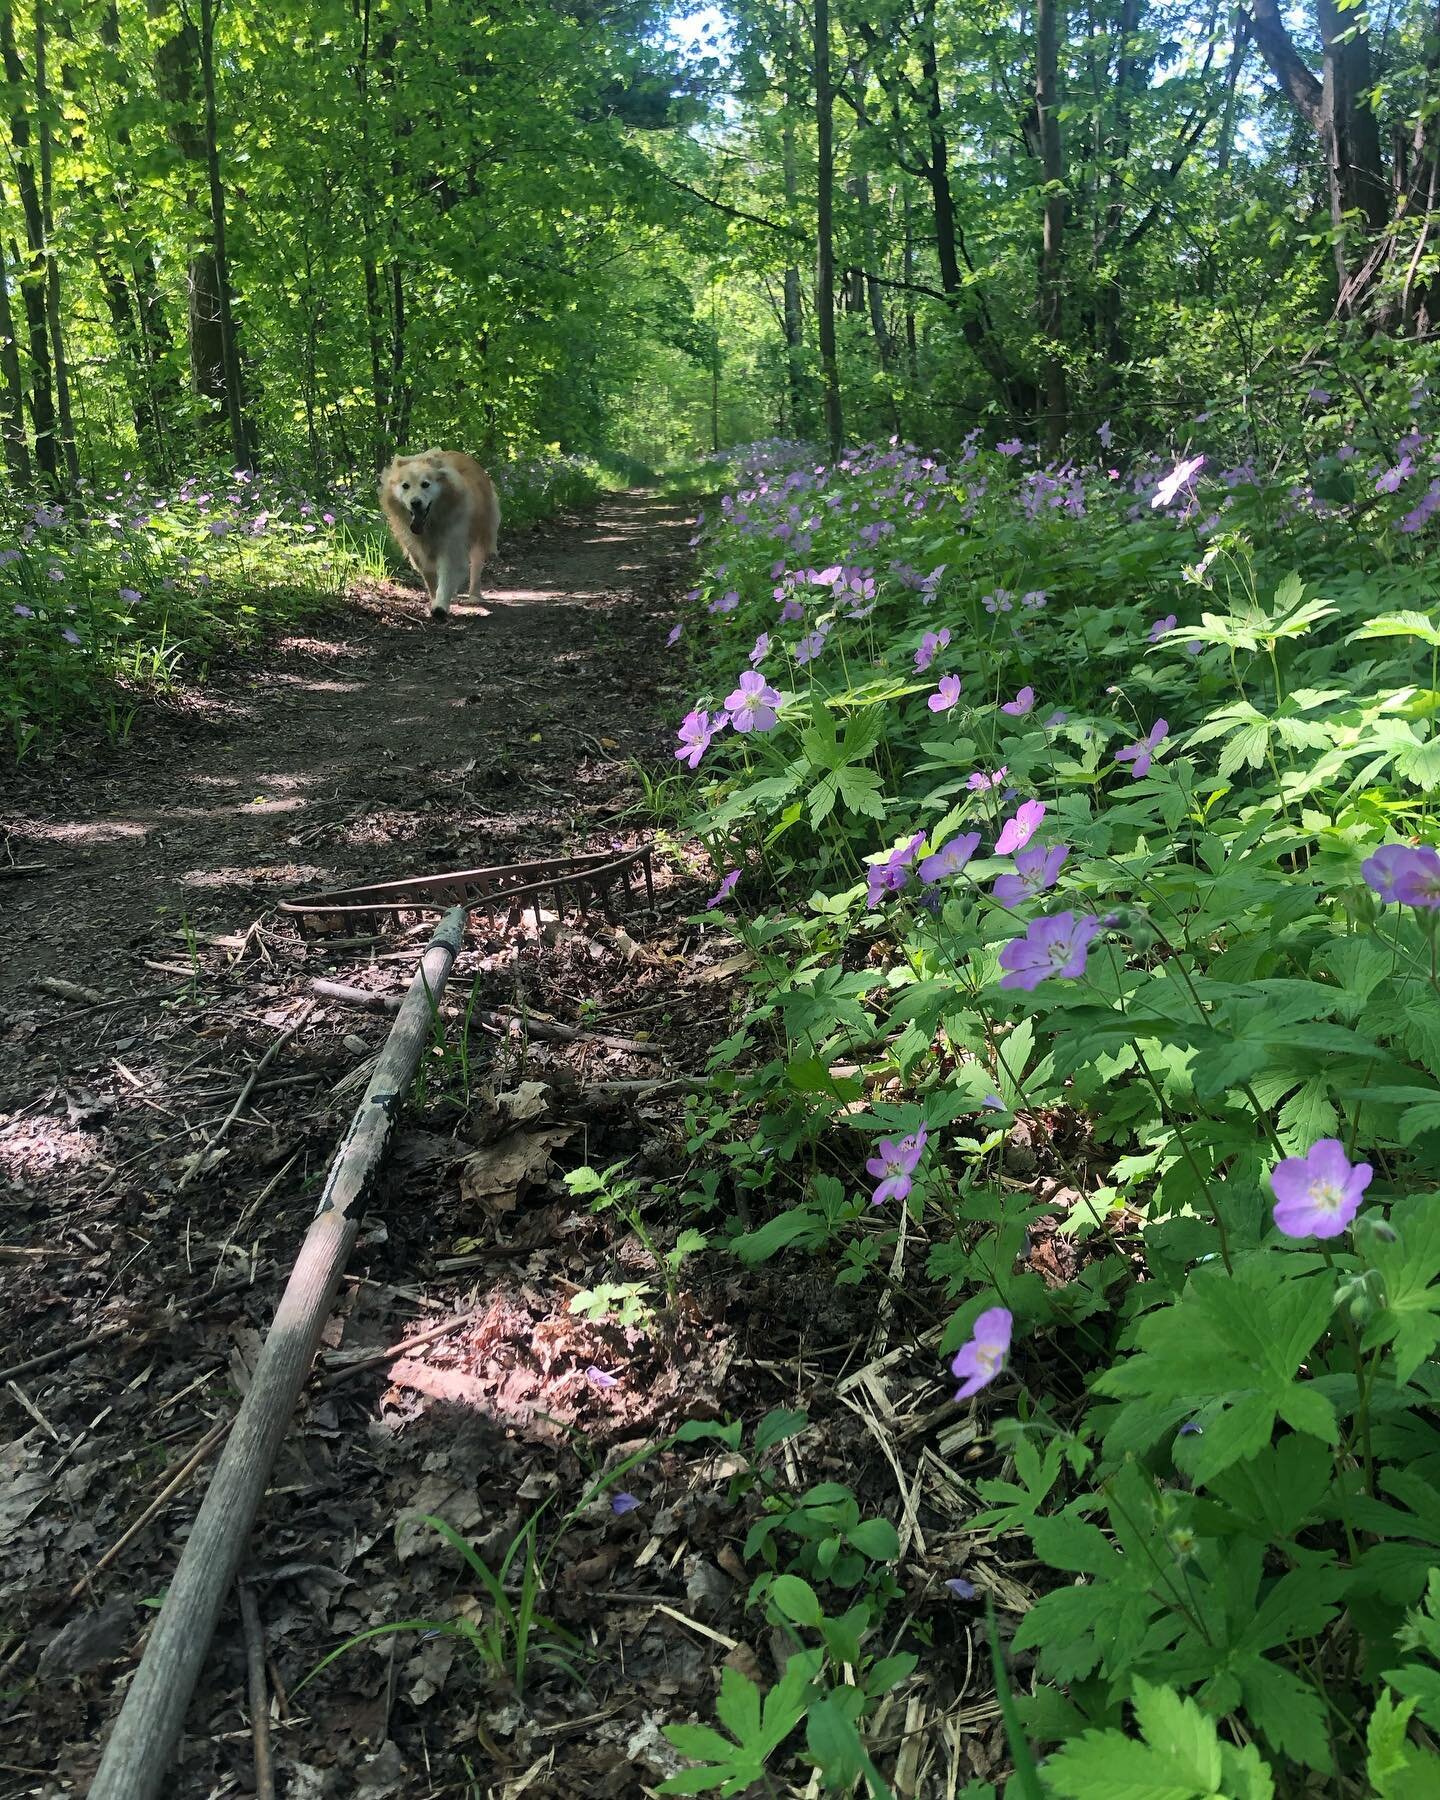 Cleaning up the NatiFo Forty singletrack this morning and tomorrow morning. 5 June, coming up quick! BikeReg link and info at webpage. #gravelgrinder #gravelrace #raceyourbike #flxoutdoors #steelgravelbike